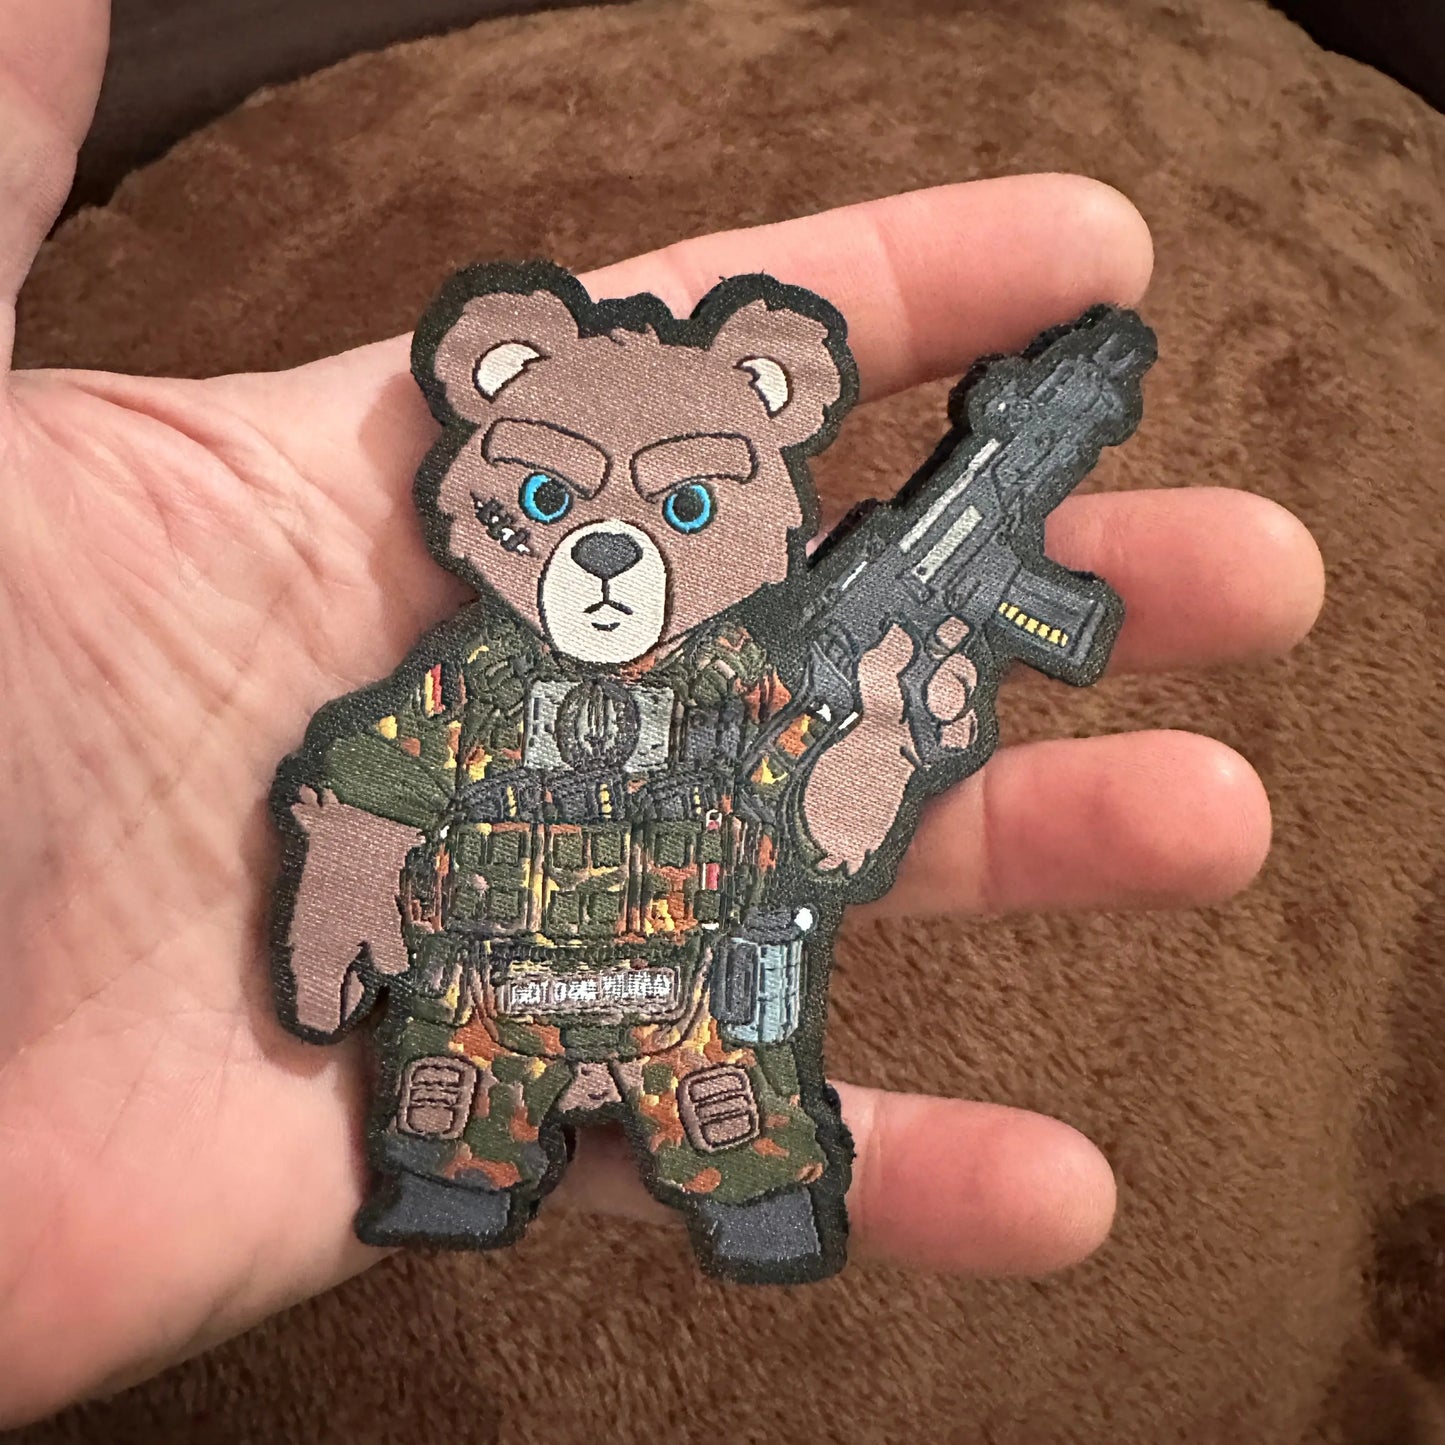 KSK TEDDY WOVEN patchlab